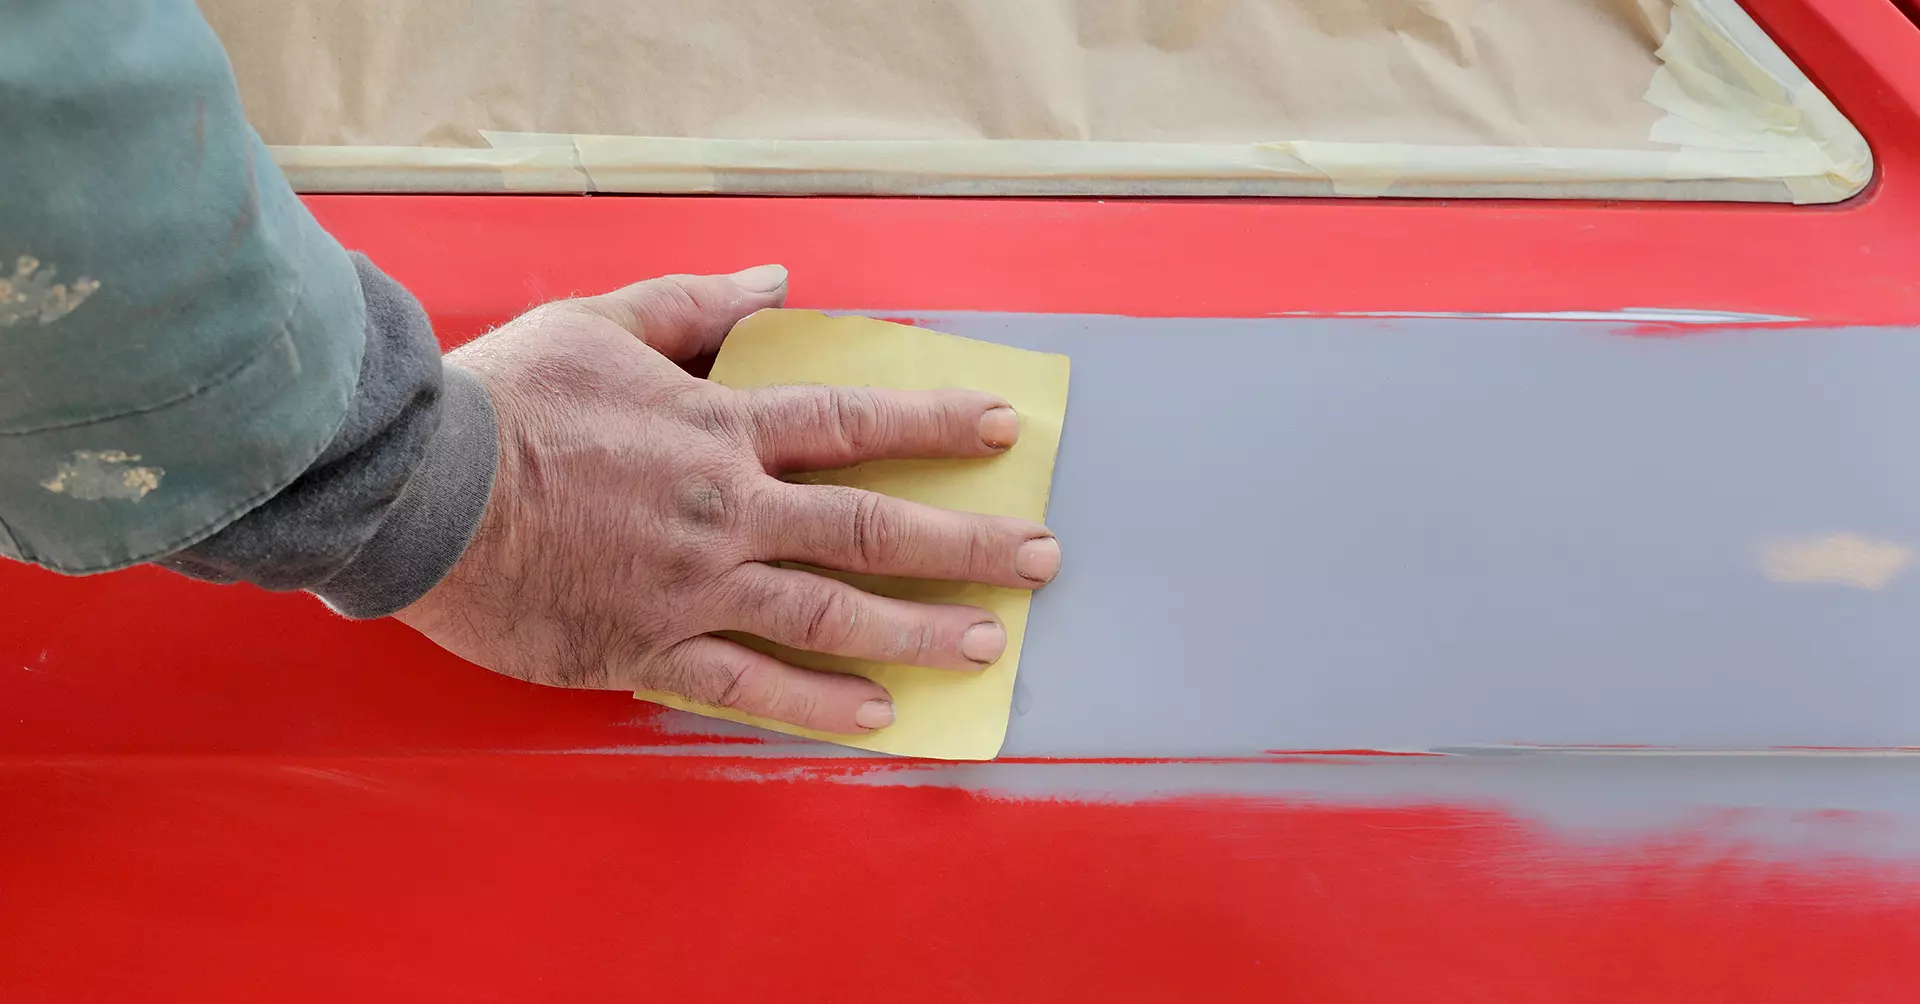 How To Guide Coat and Block Sand Spot Putty To Fix Small Dent 